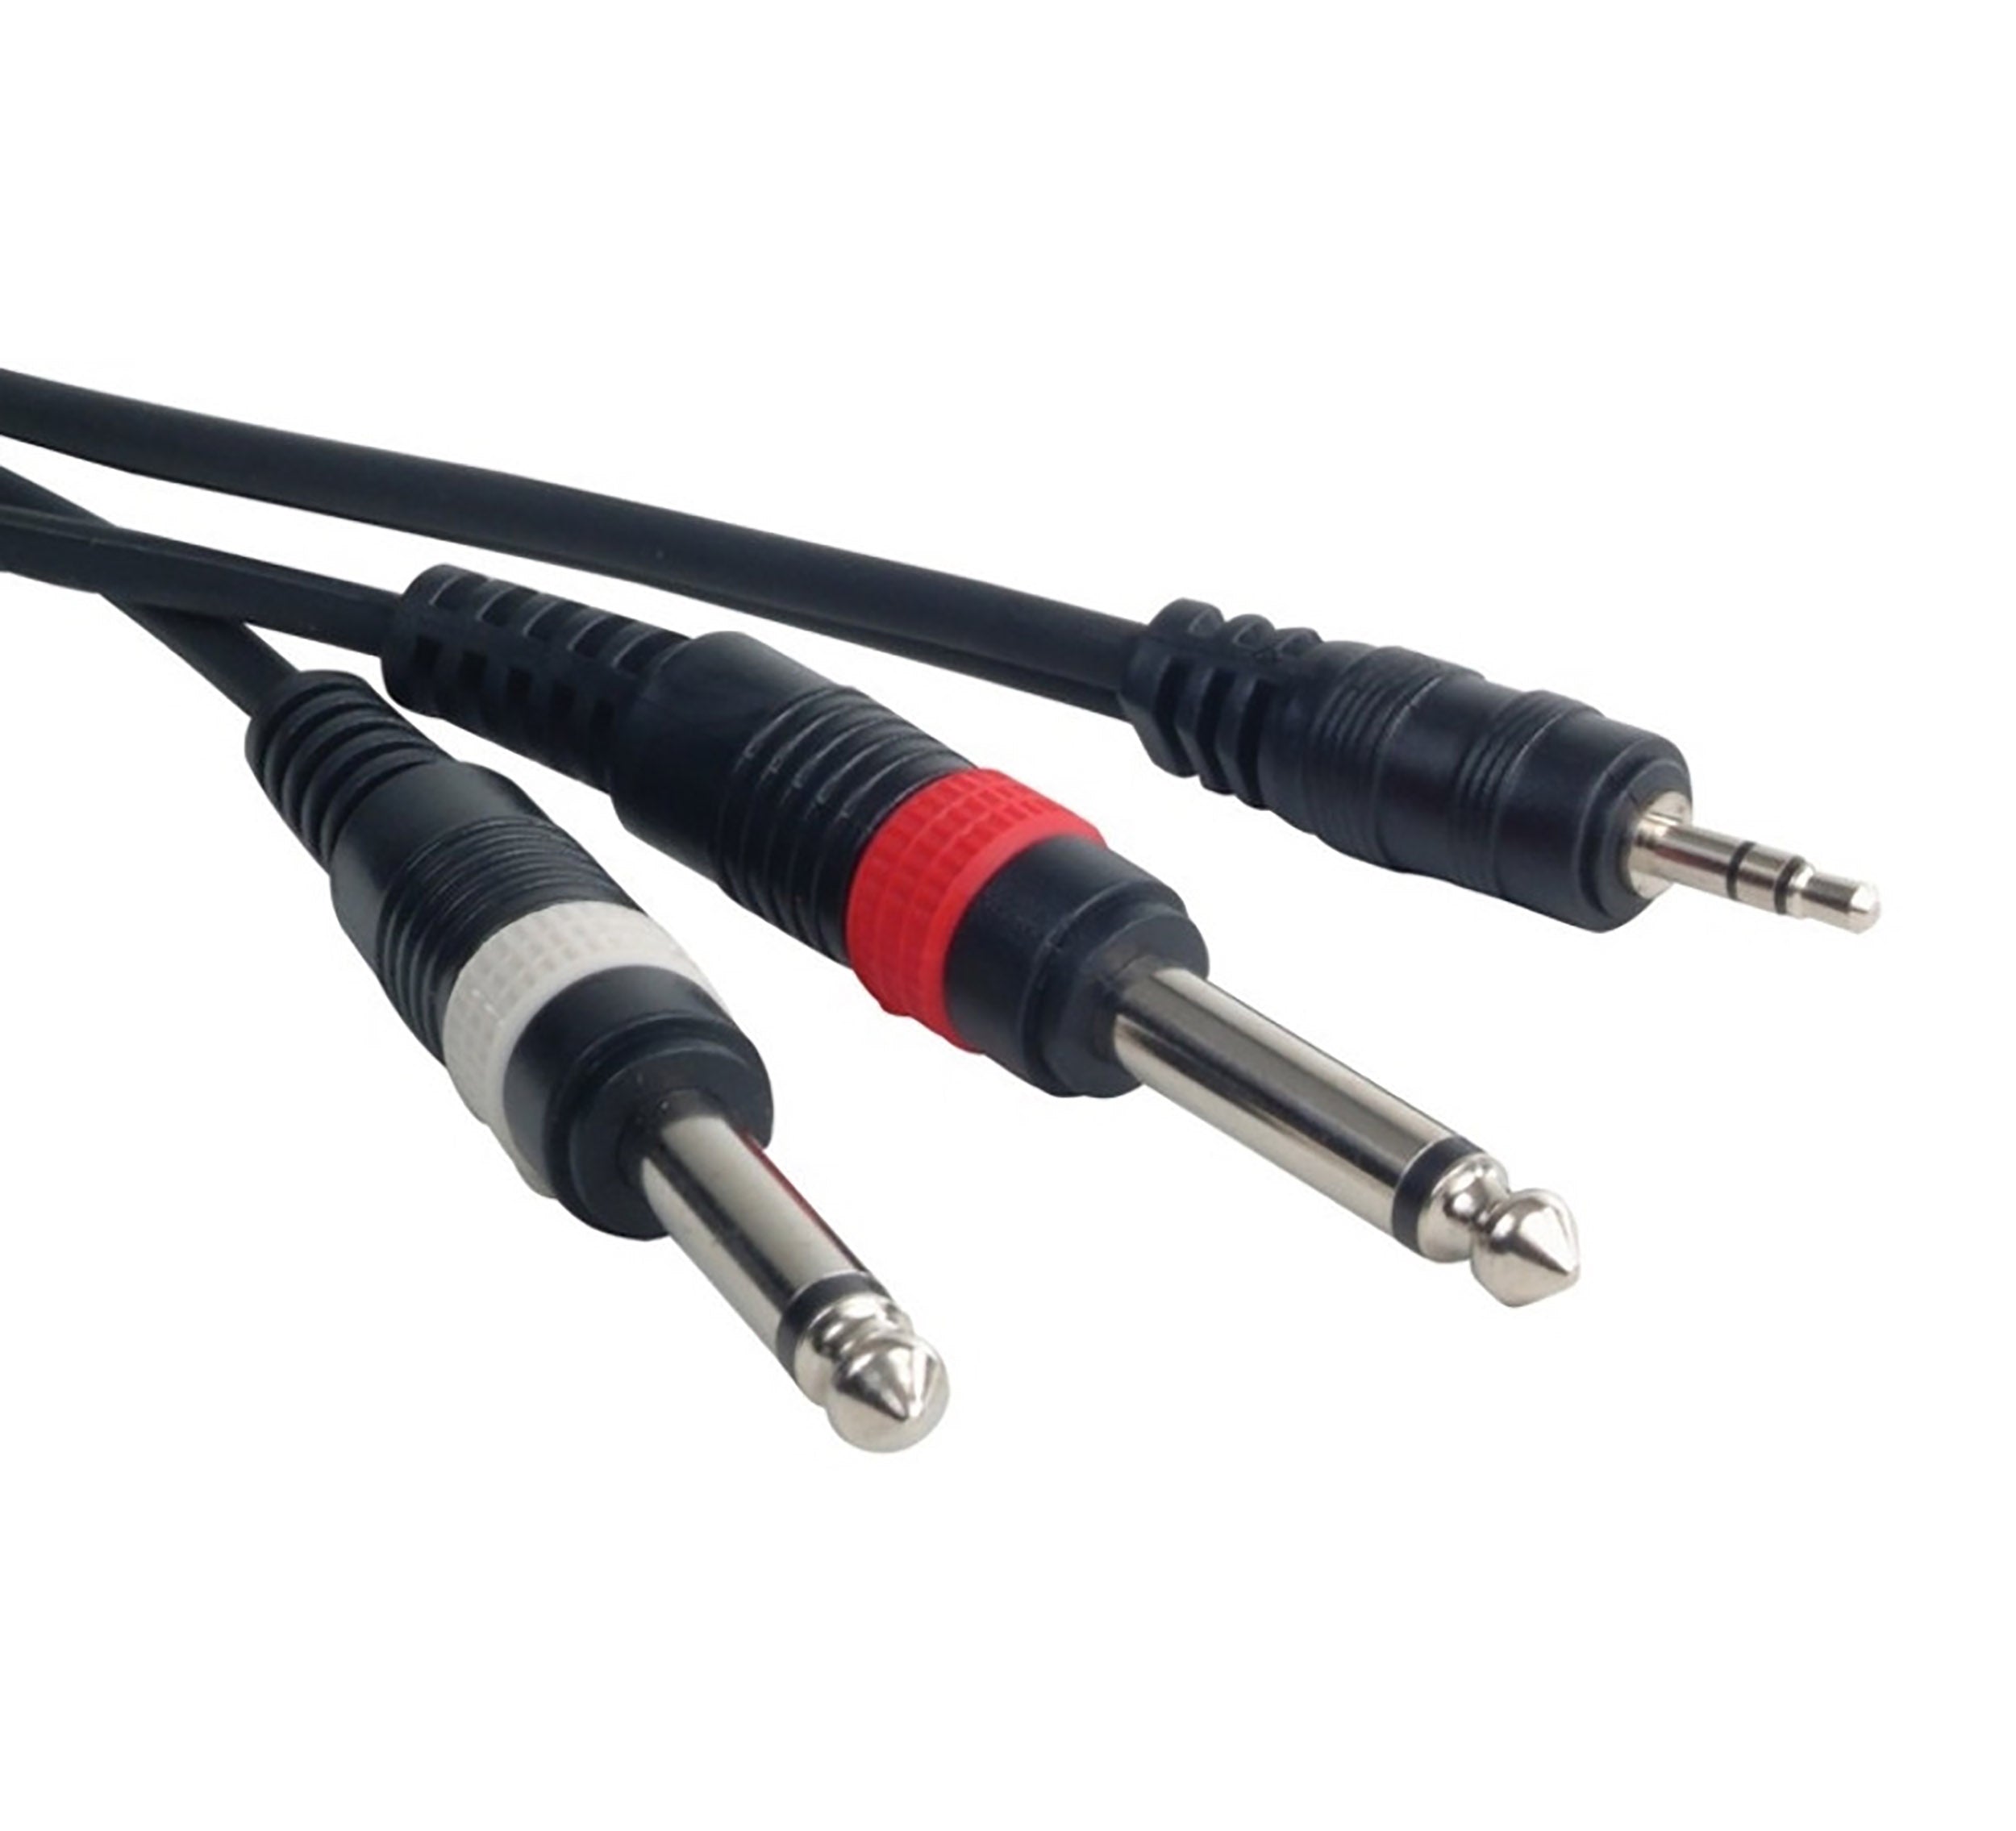 Accu-Cable RC4-6, Dual RCA to Dual RCA 1/4" Cable – 6 Ft by Accu Cable